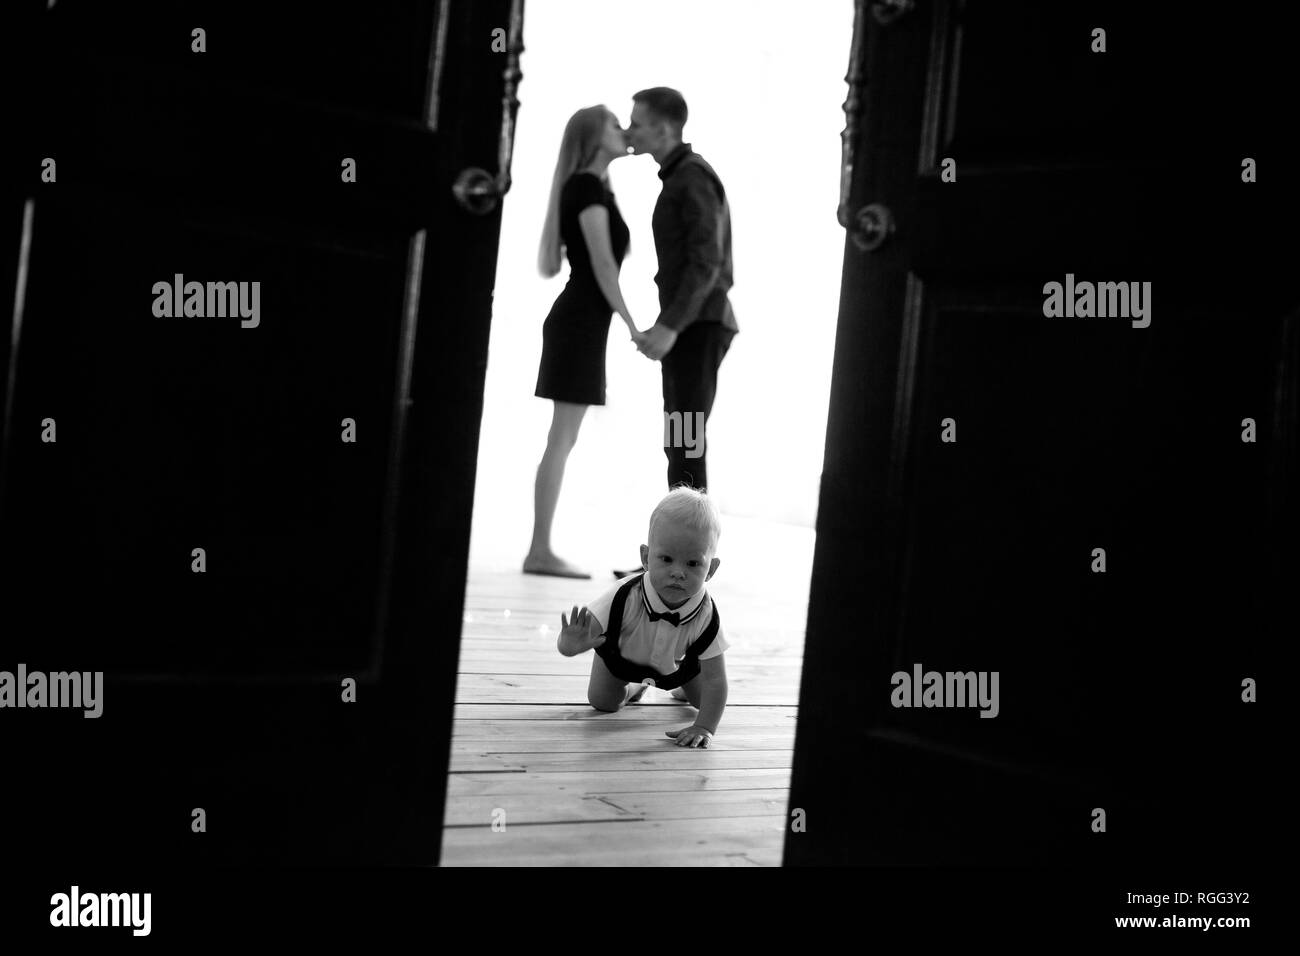 Baby boy crawls at the floor on background of his kissing parents. View through the opened door. Black and white image. Stock Photo